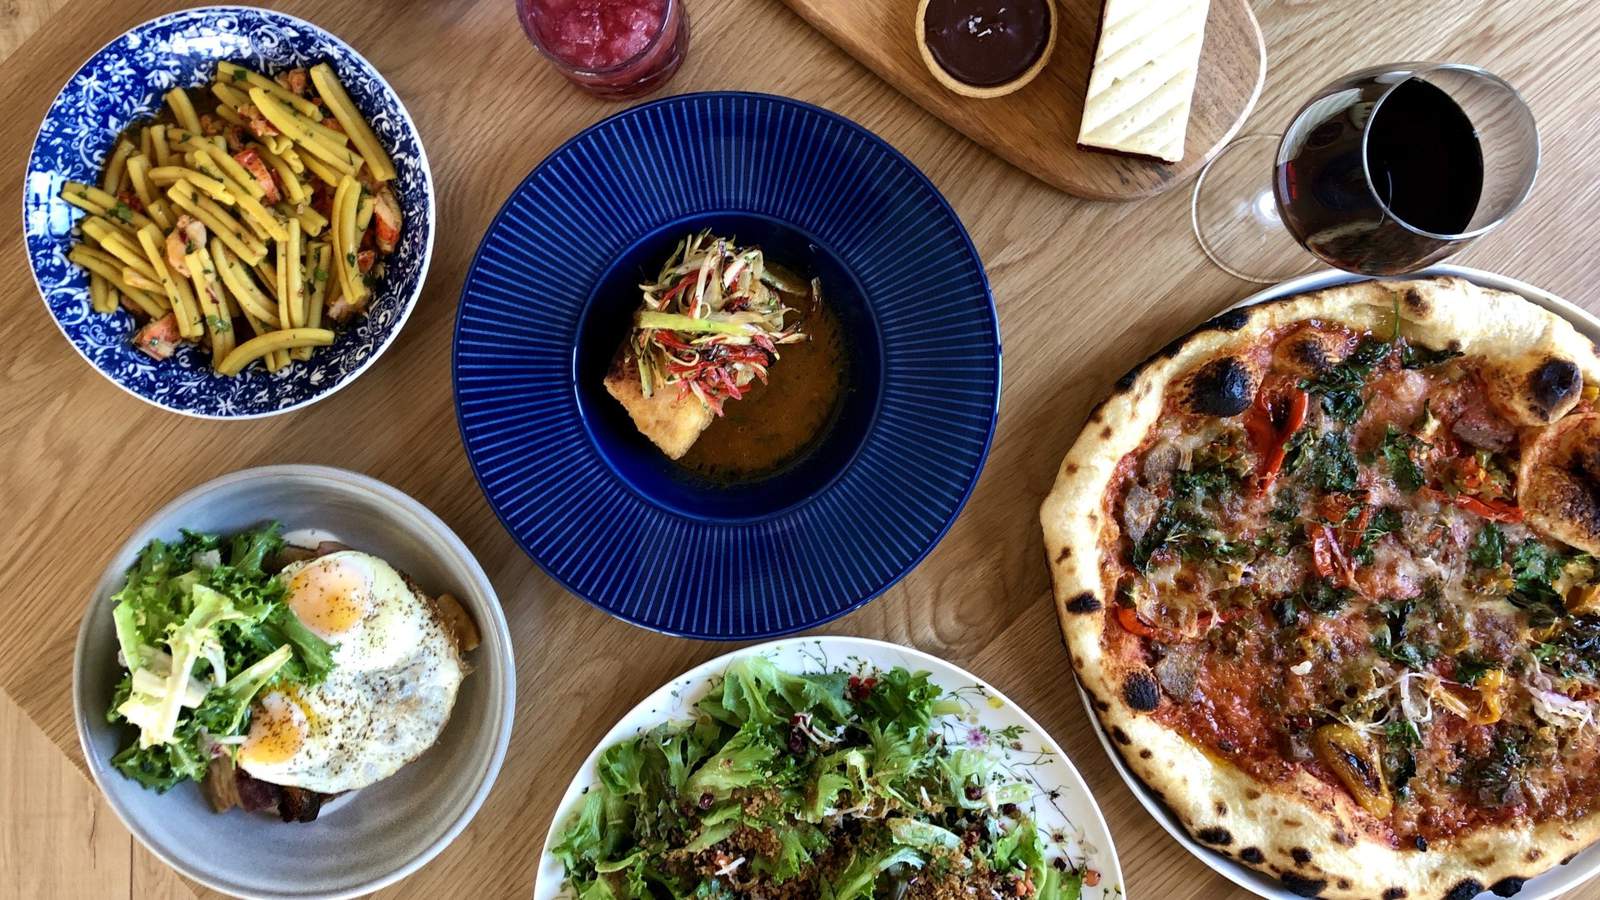 This New Ann Arbor restaurant will have pizza, pastries, and fine dining all under one roof